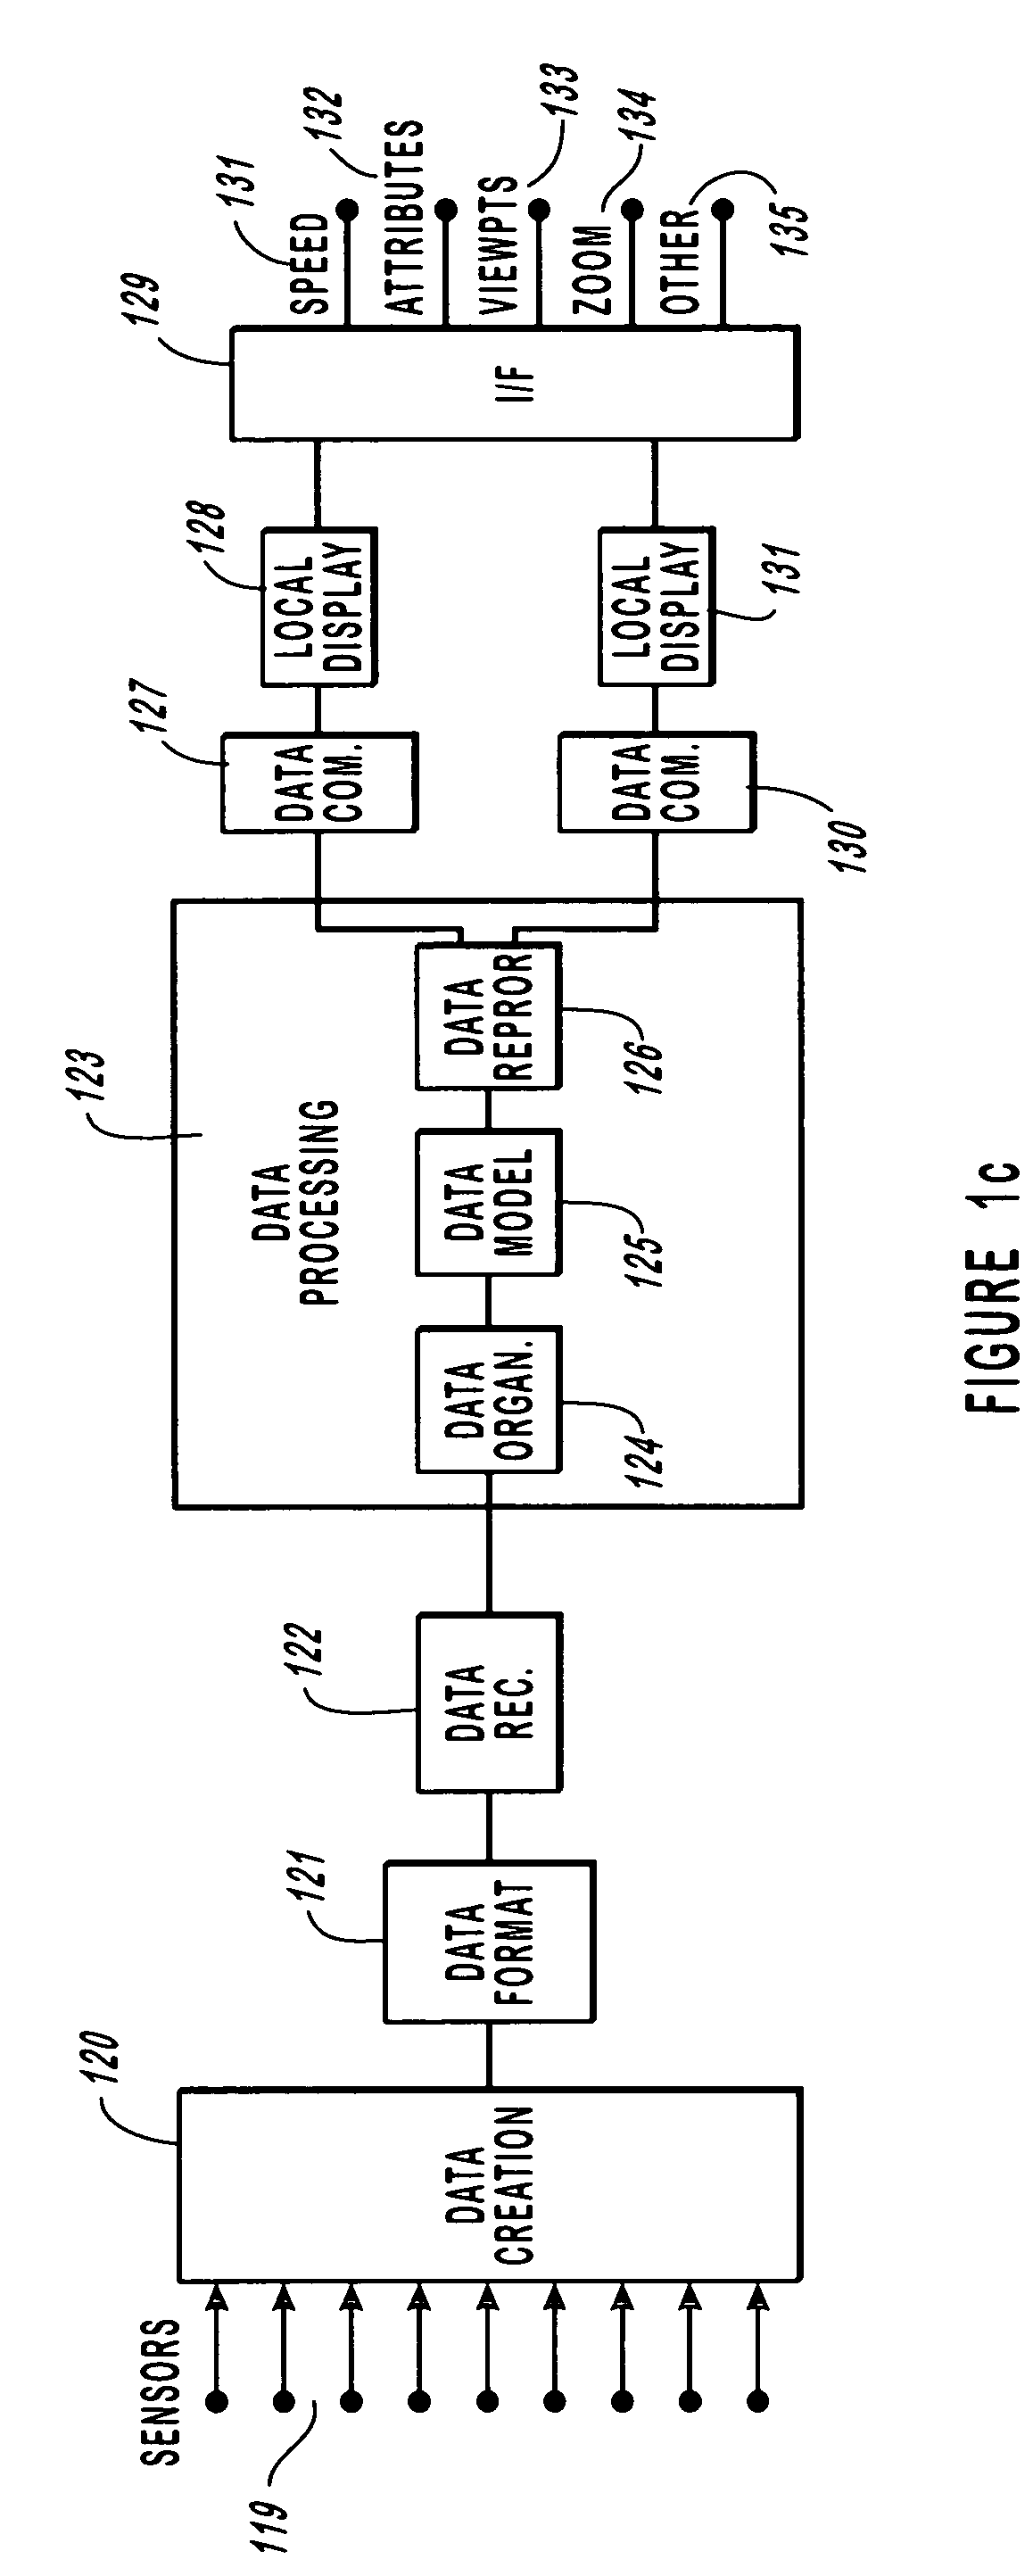 Method and apparatus for monitoring dynamic cardiovascular function using n-dimensional representatives of critical functions